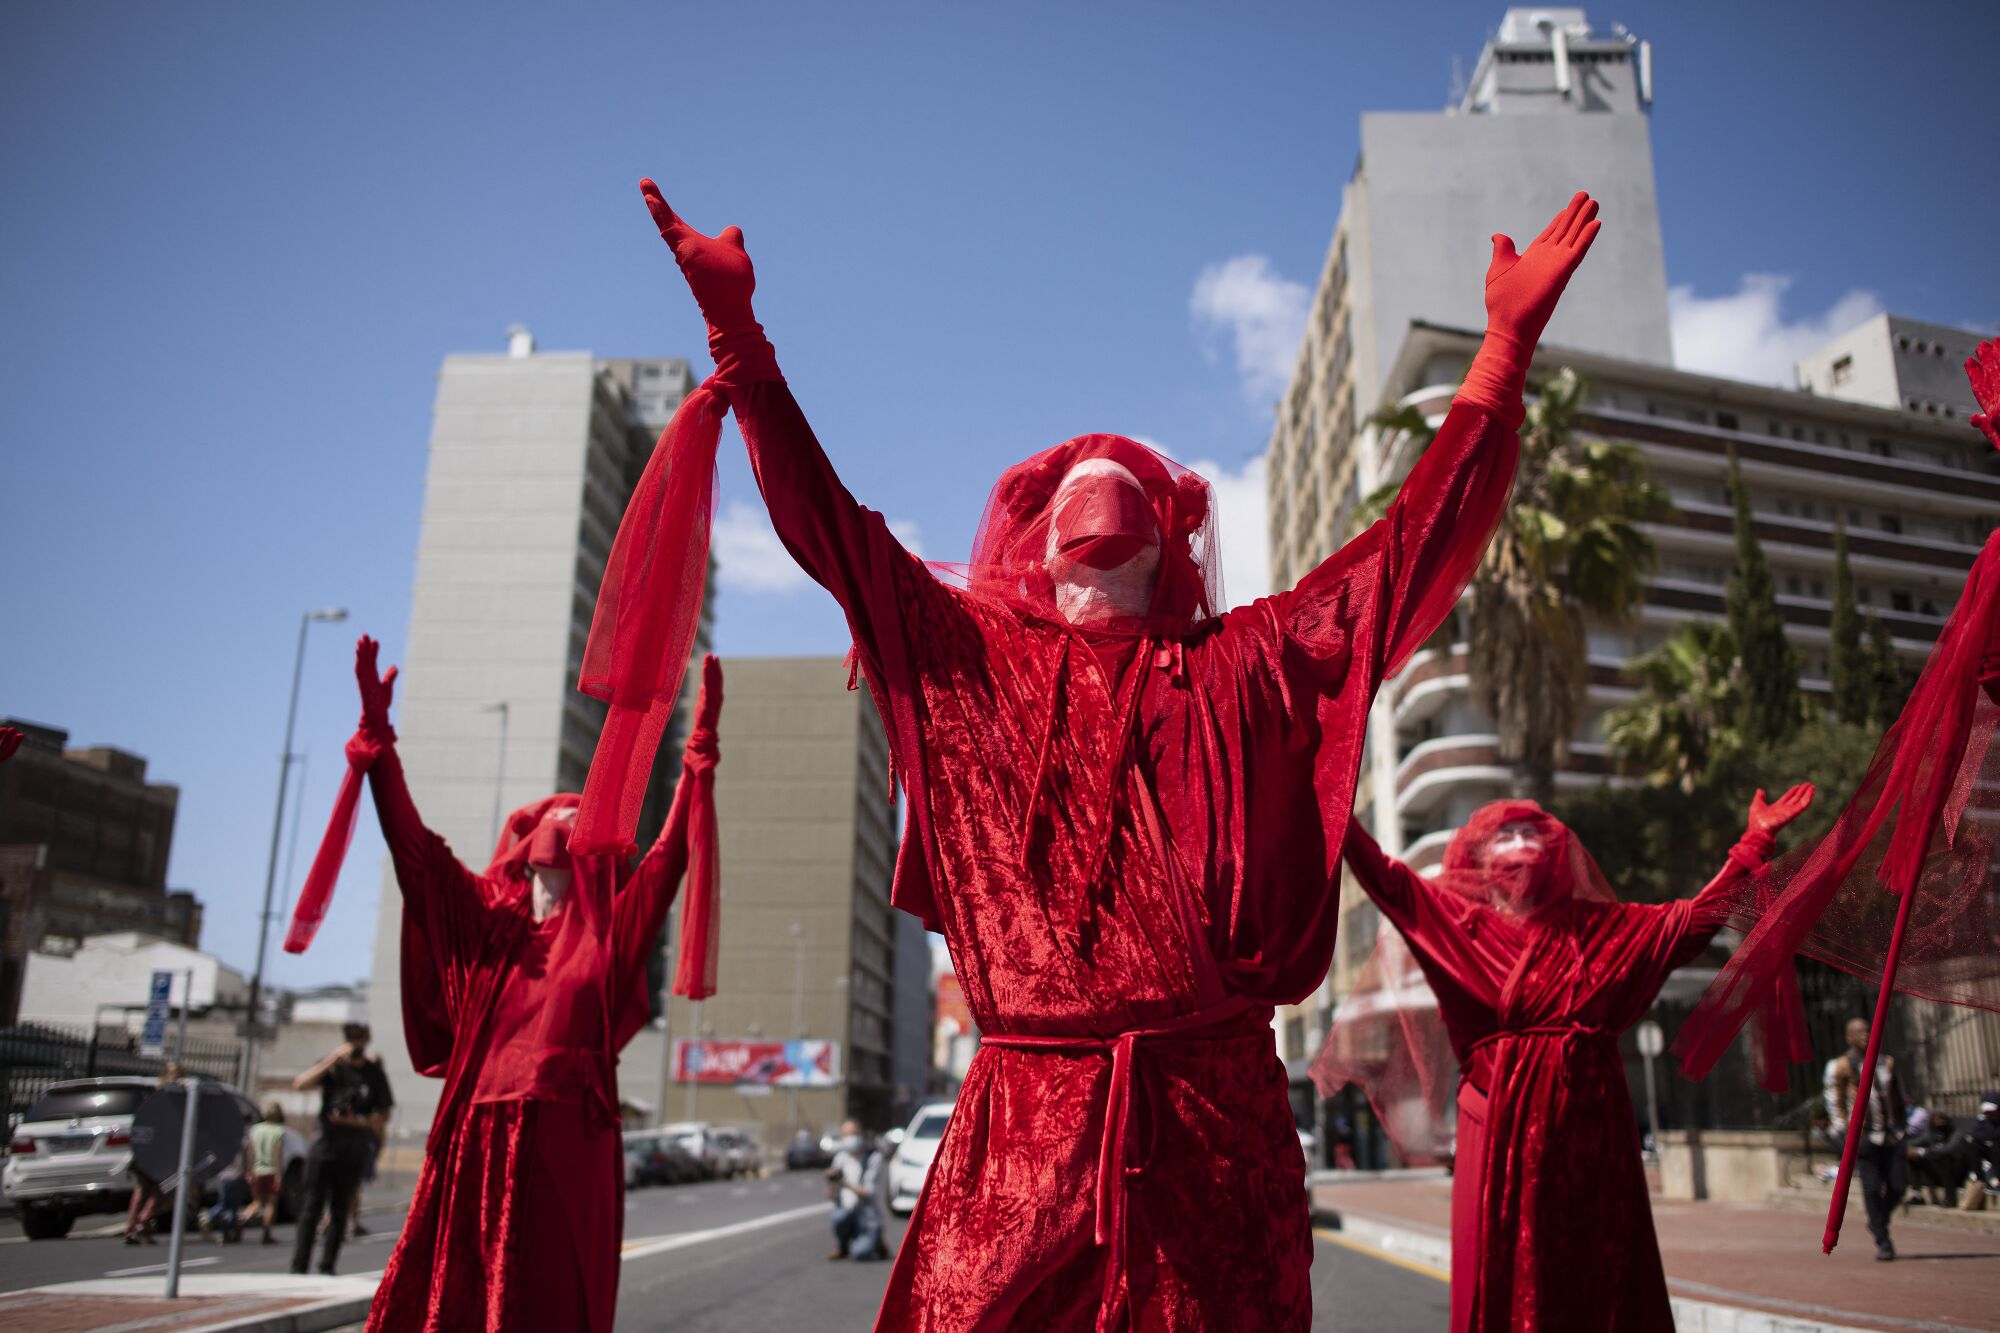 Outdoors, three people dressed in red lift their arms to the sky.